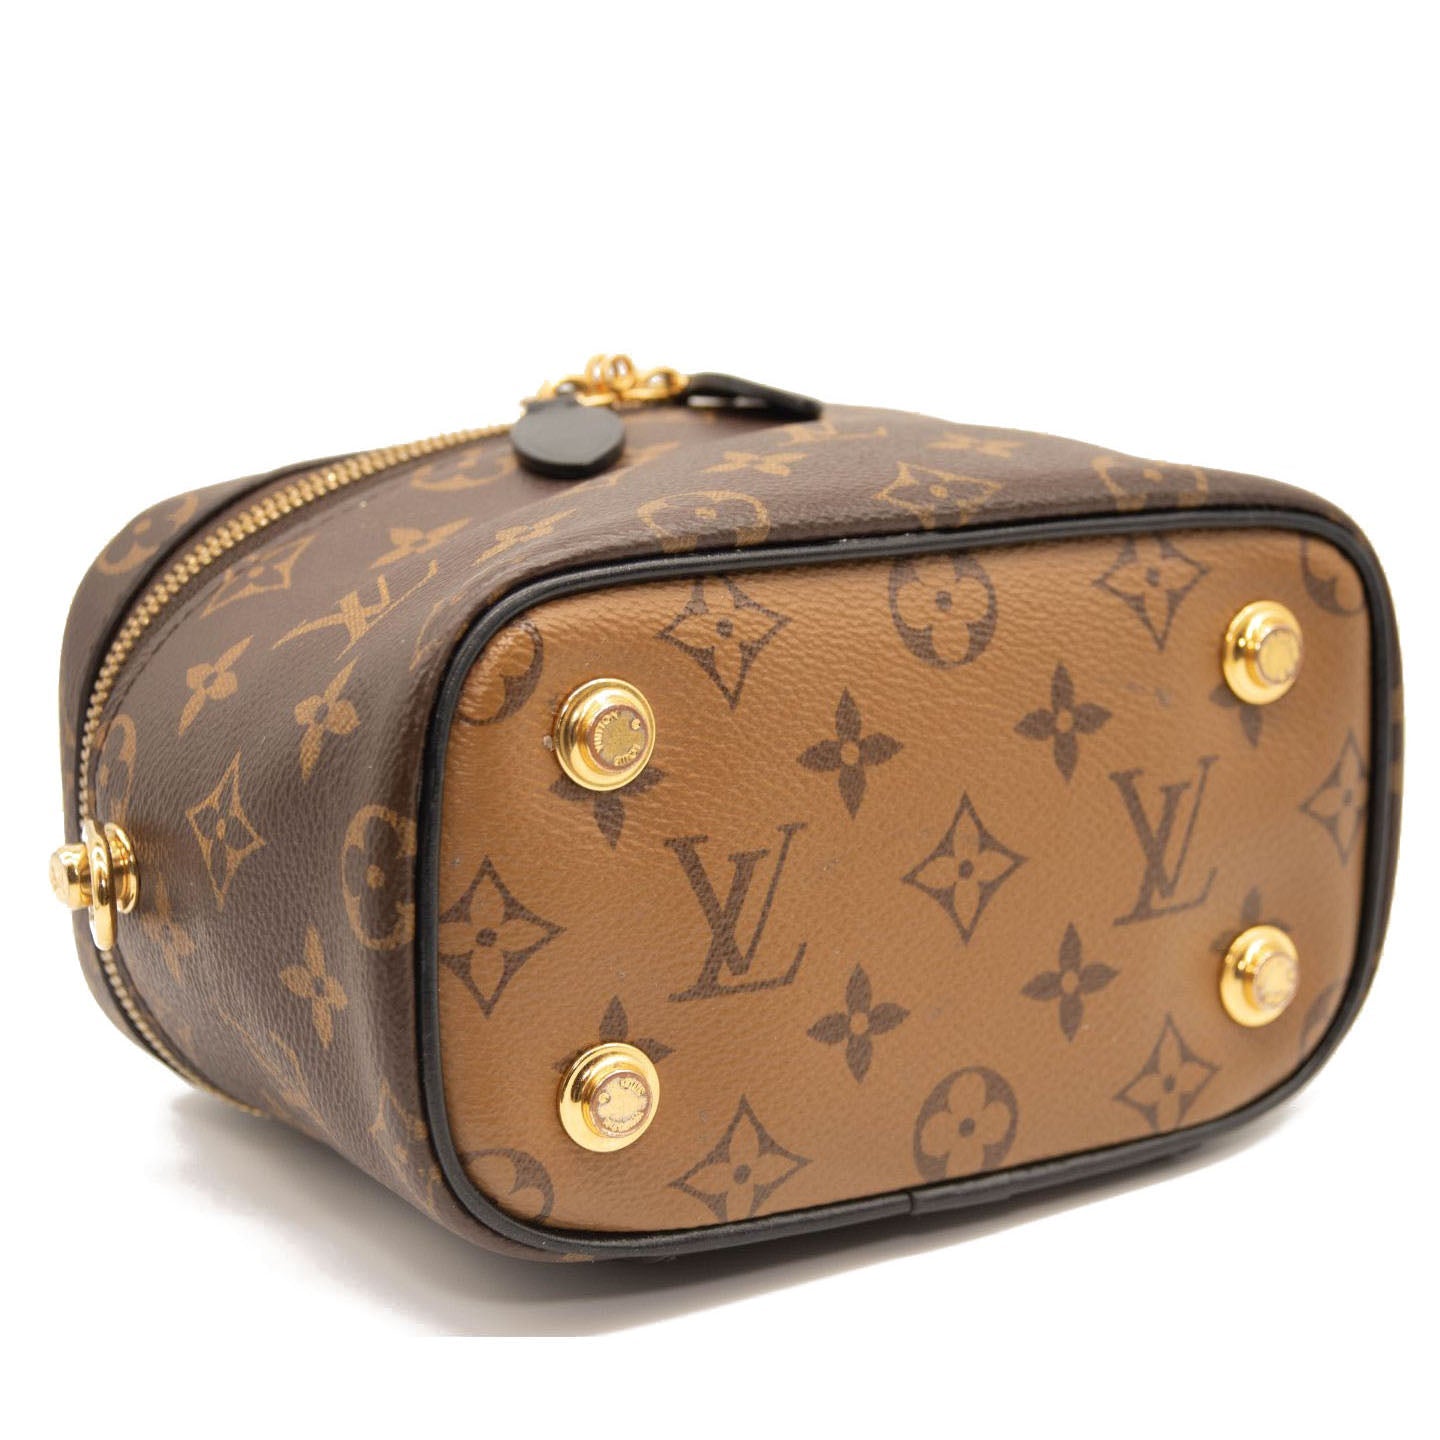 Louis Vuitton Ellipse BB White/Brown in Coated Canvas/Leather with